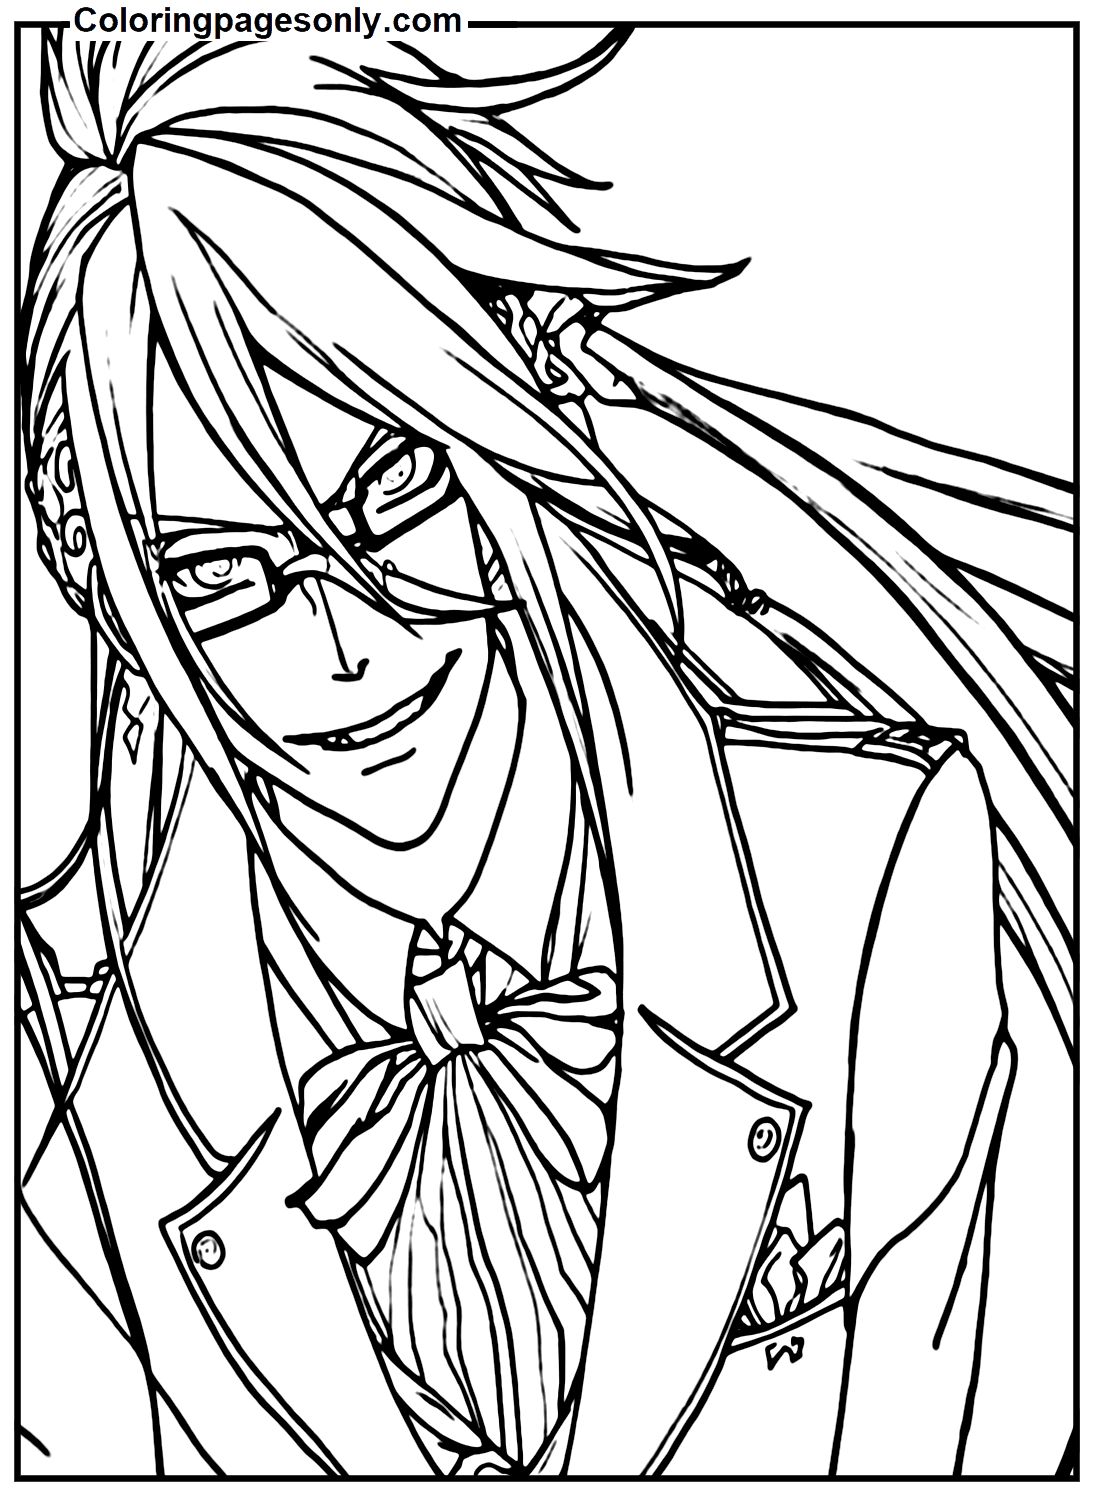 Grell Sutcliff From Black Butler Coloring Pages